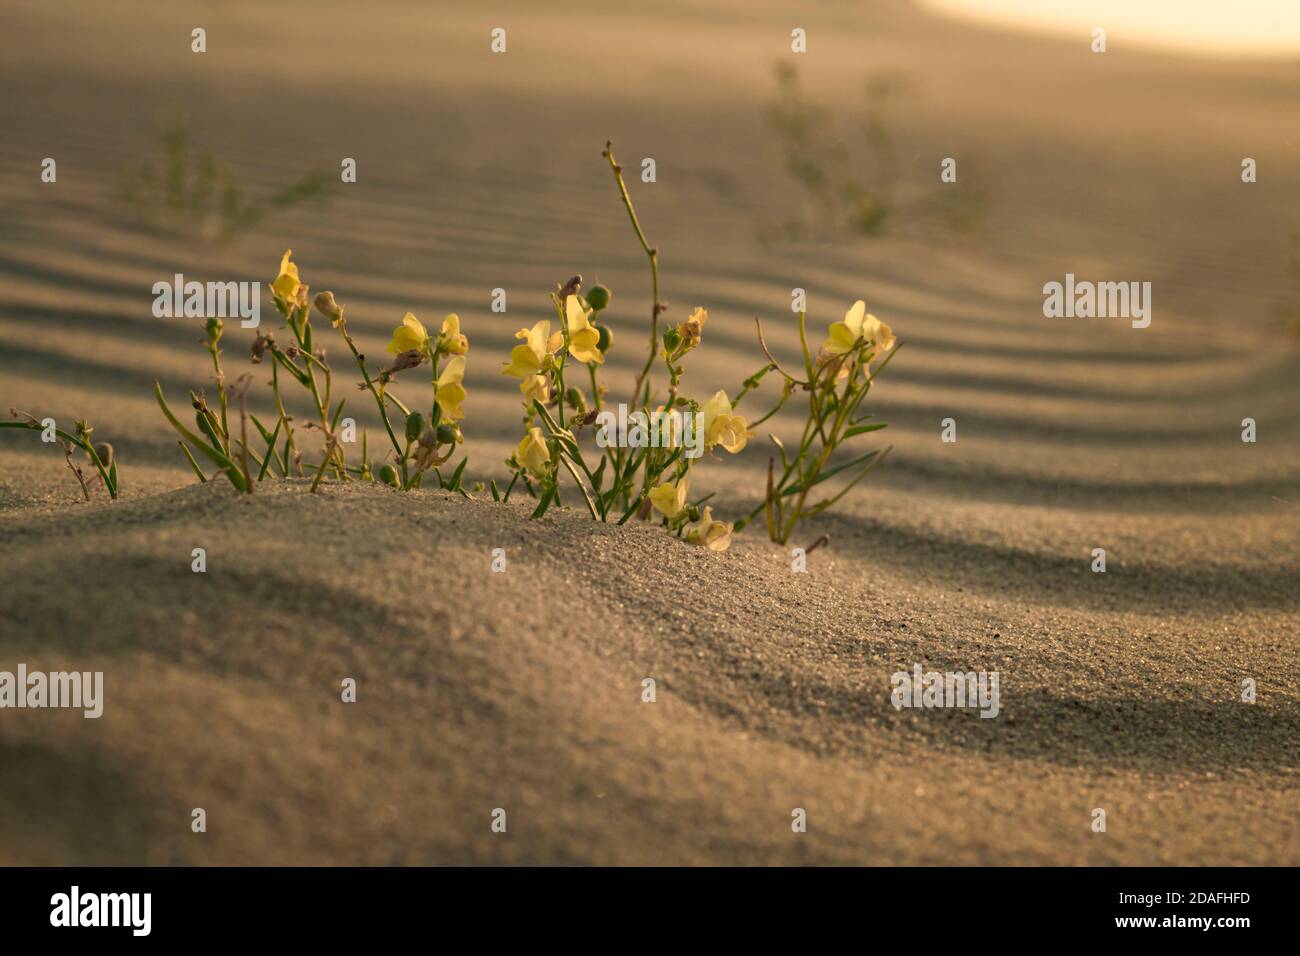 A group of blooming Gallwort (Linaria loeselii) in its natural environment at dawn, Curonian Spit, Kaliningrad region, Russia Stock Photo